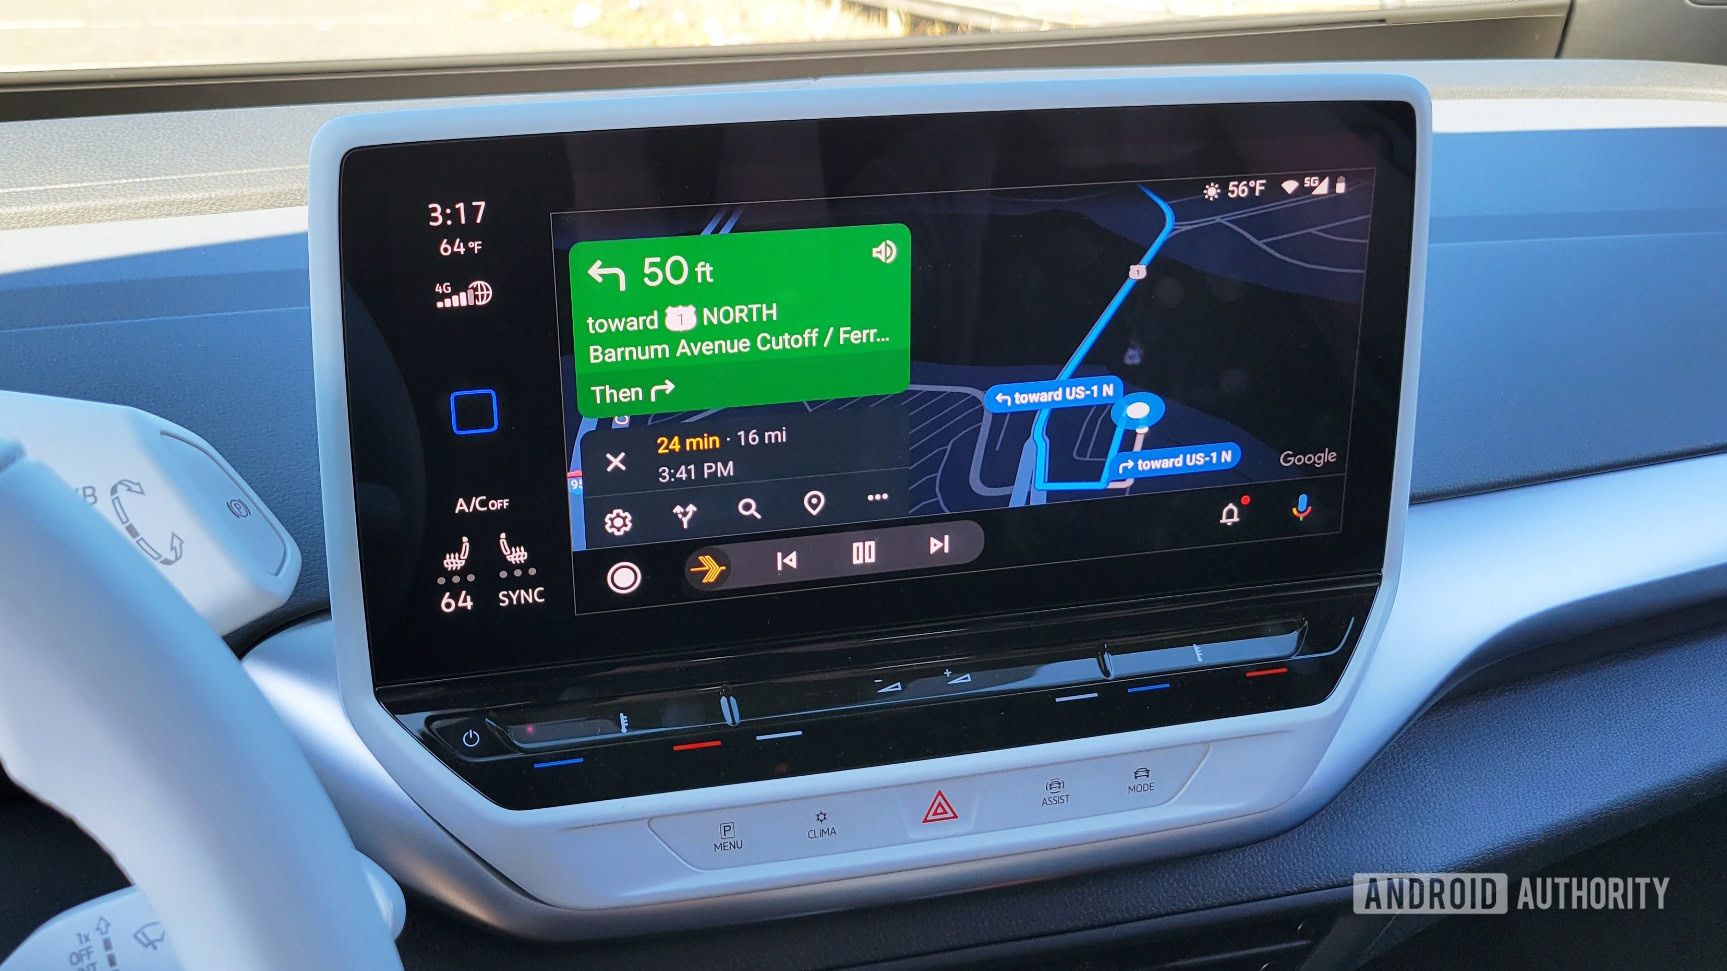 Android Auto on Volkswagen ID.4 Google Maps Navigation